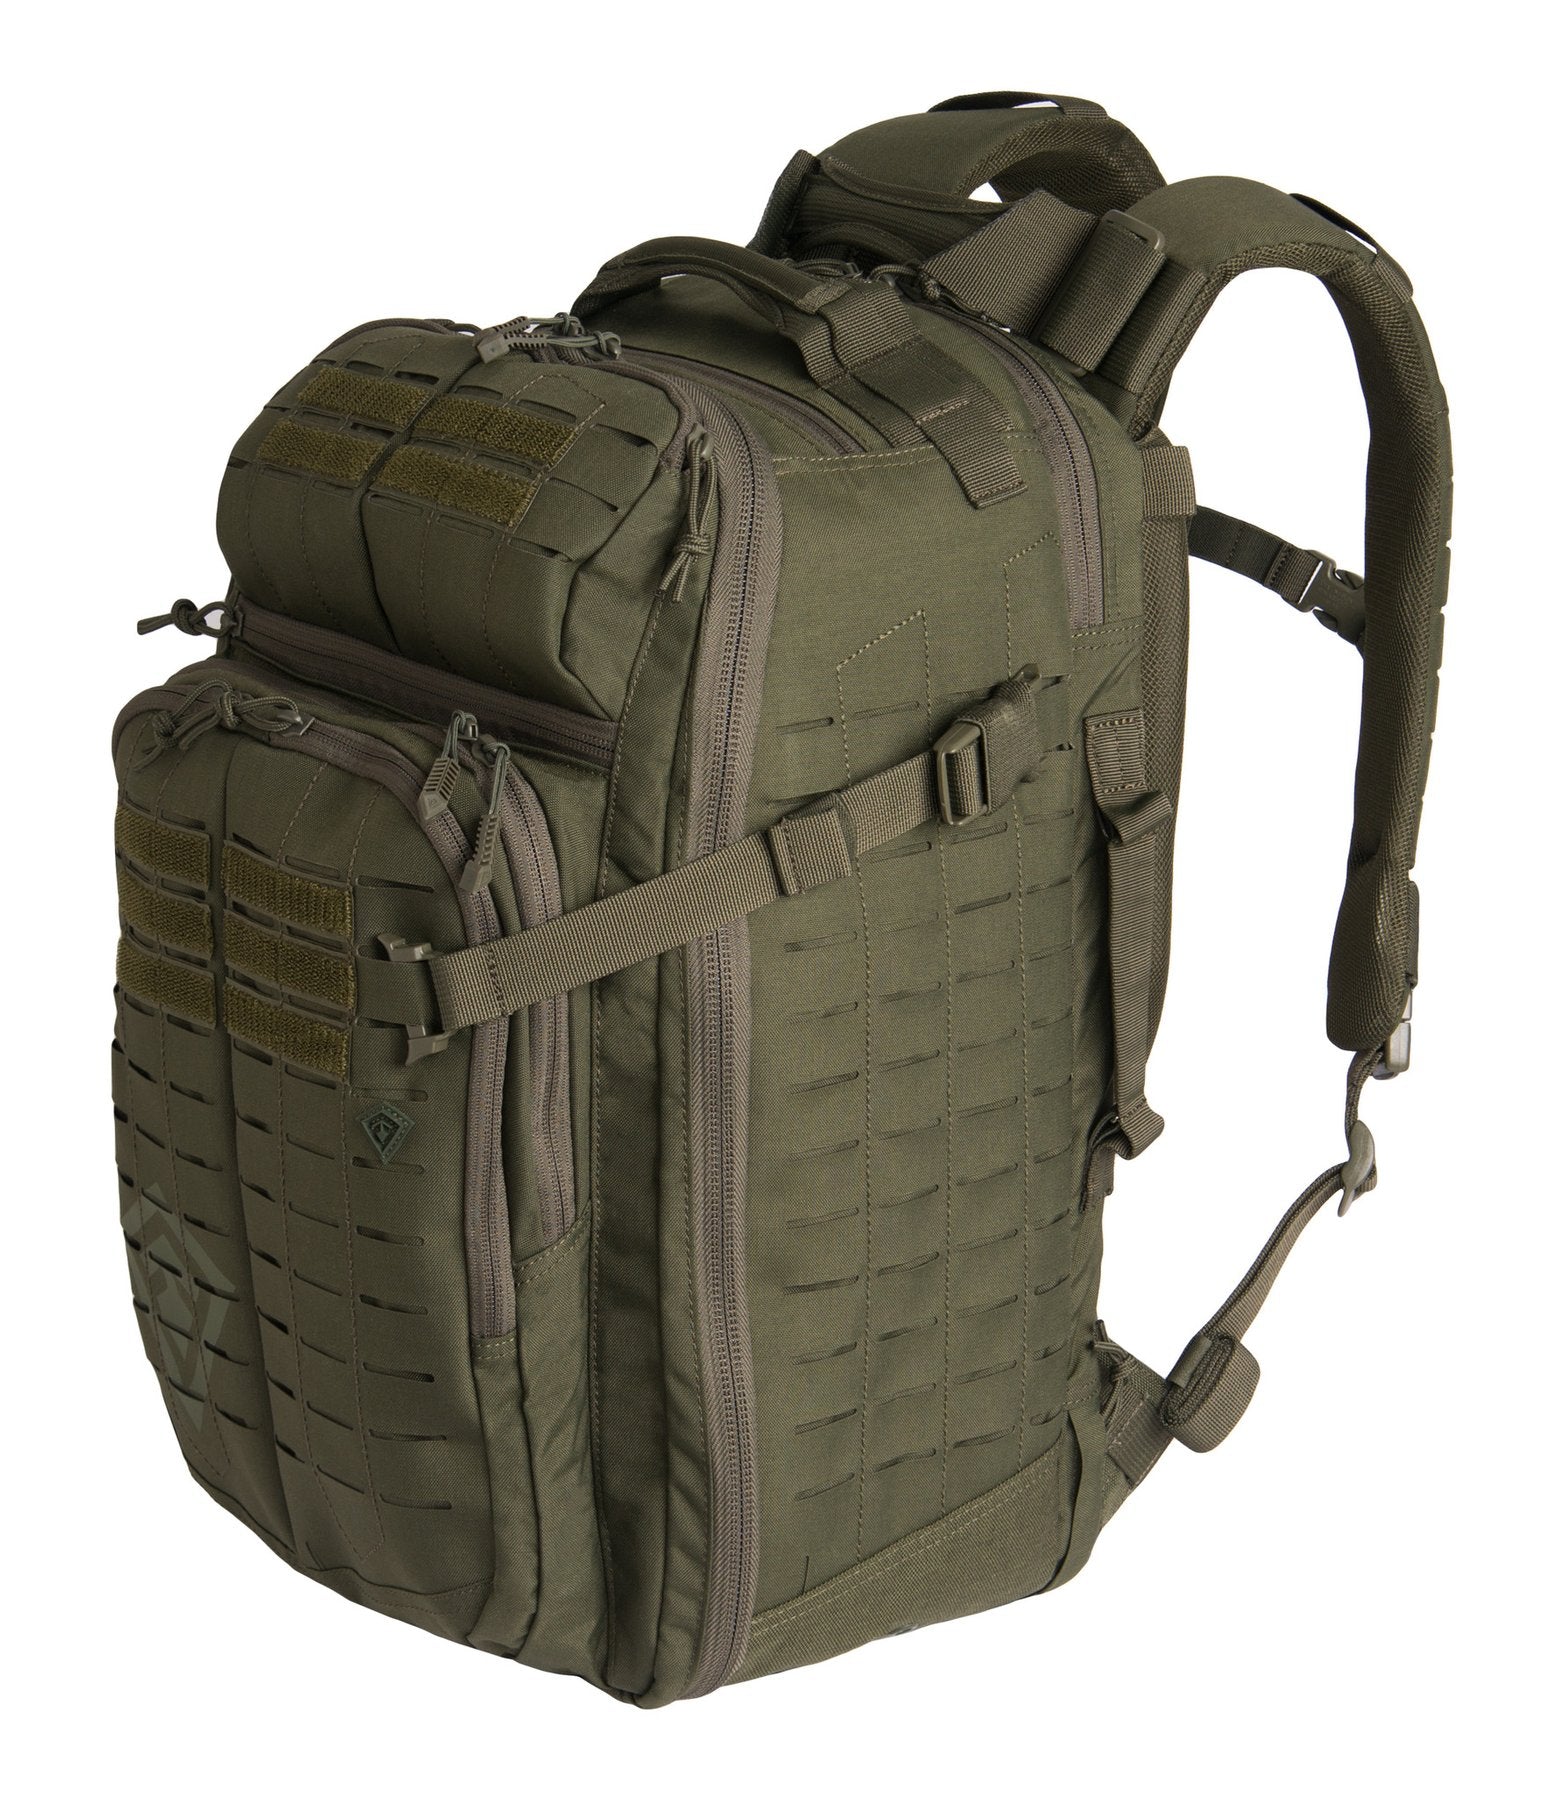 TACTIX 1-Day Plus Backpack (180021) Black, Coyote, OD Green